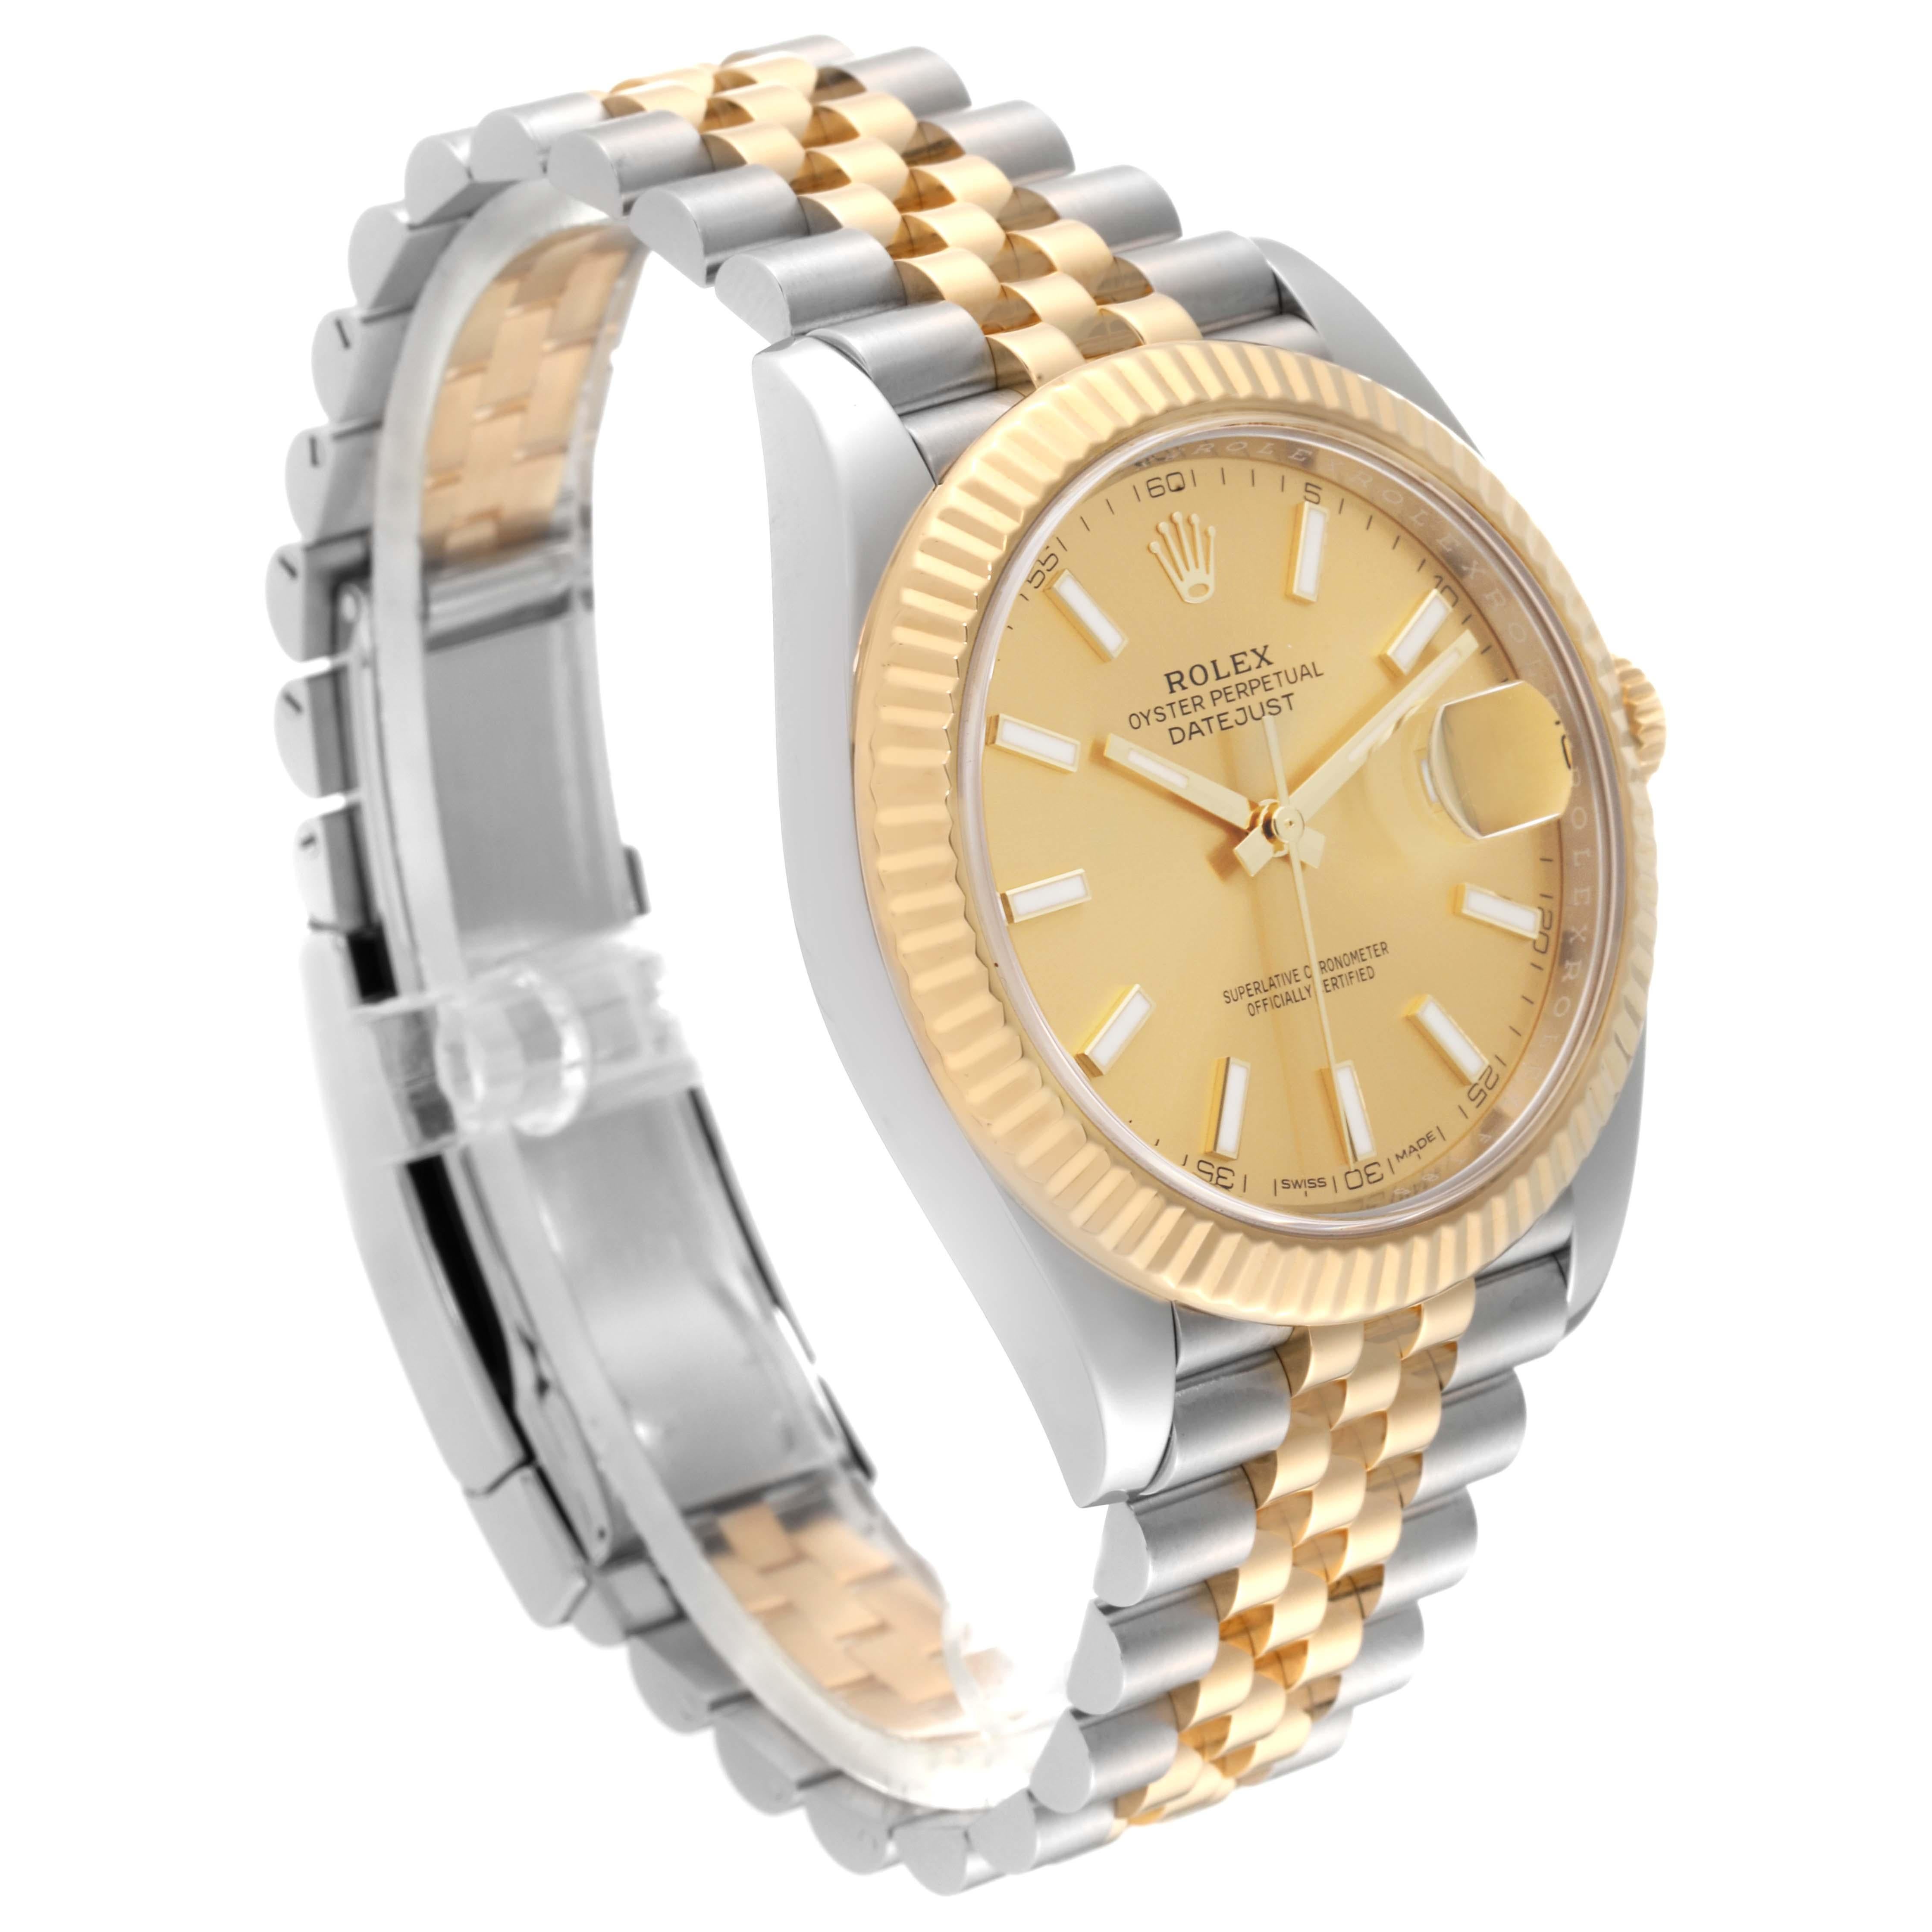 Rolex Datejust 41 Steel Yellow Gold Champagne Dial Mens Watch 126333 5